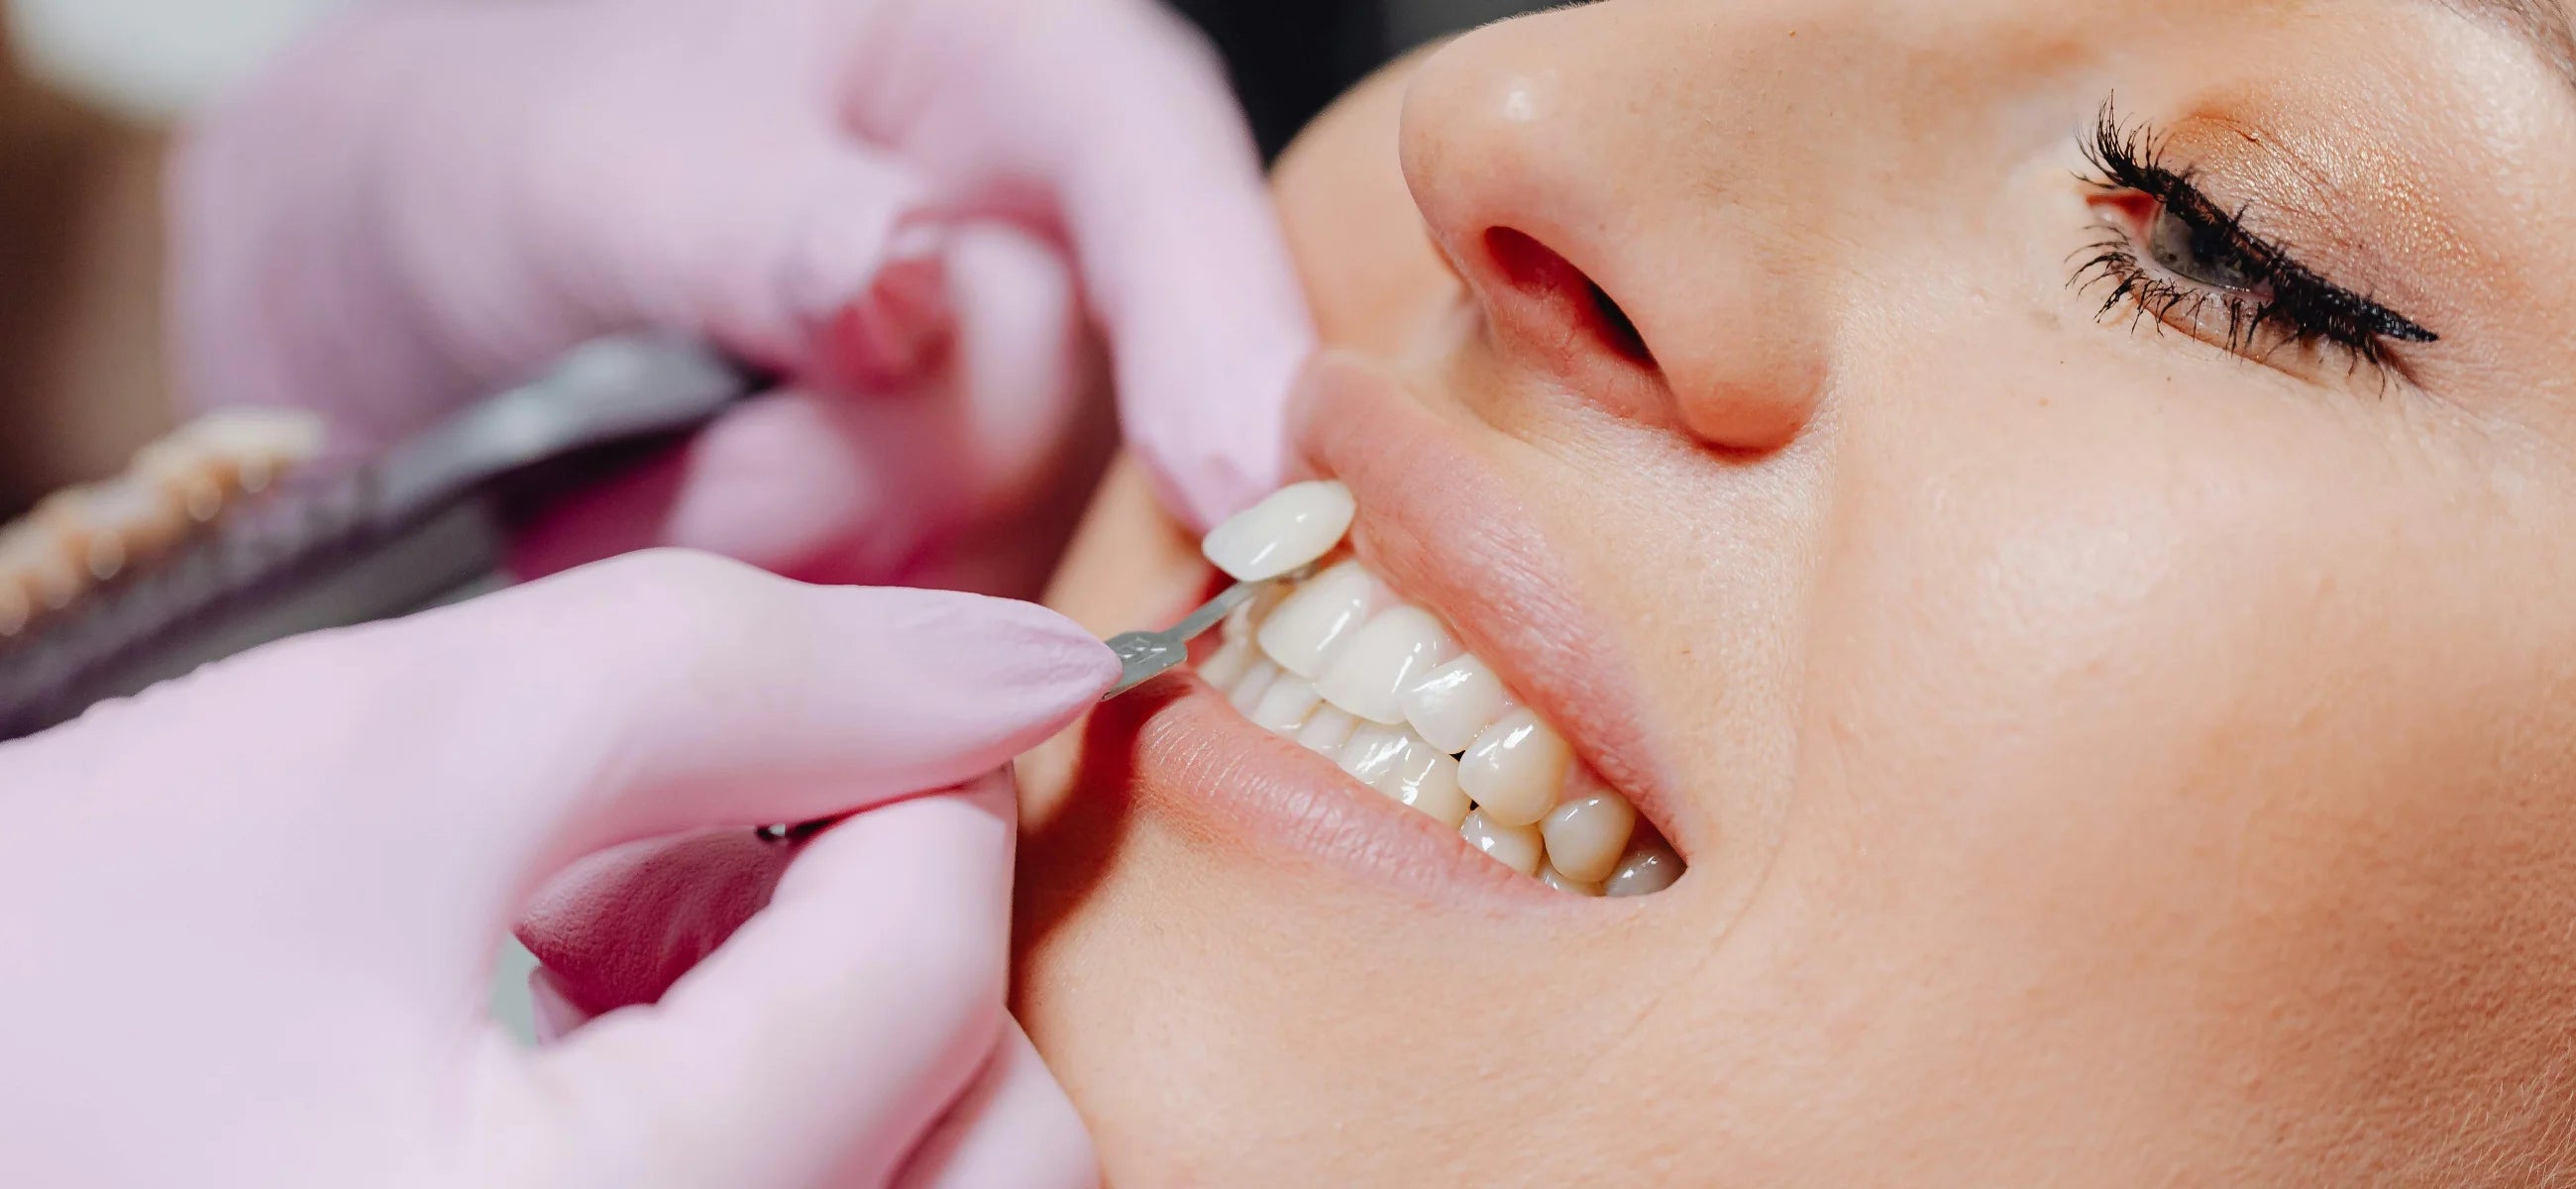 Cosmetic dentistry 101 - How to elevate your smile with dental veneers